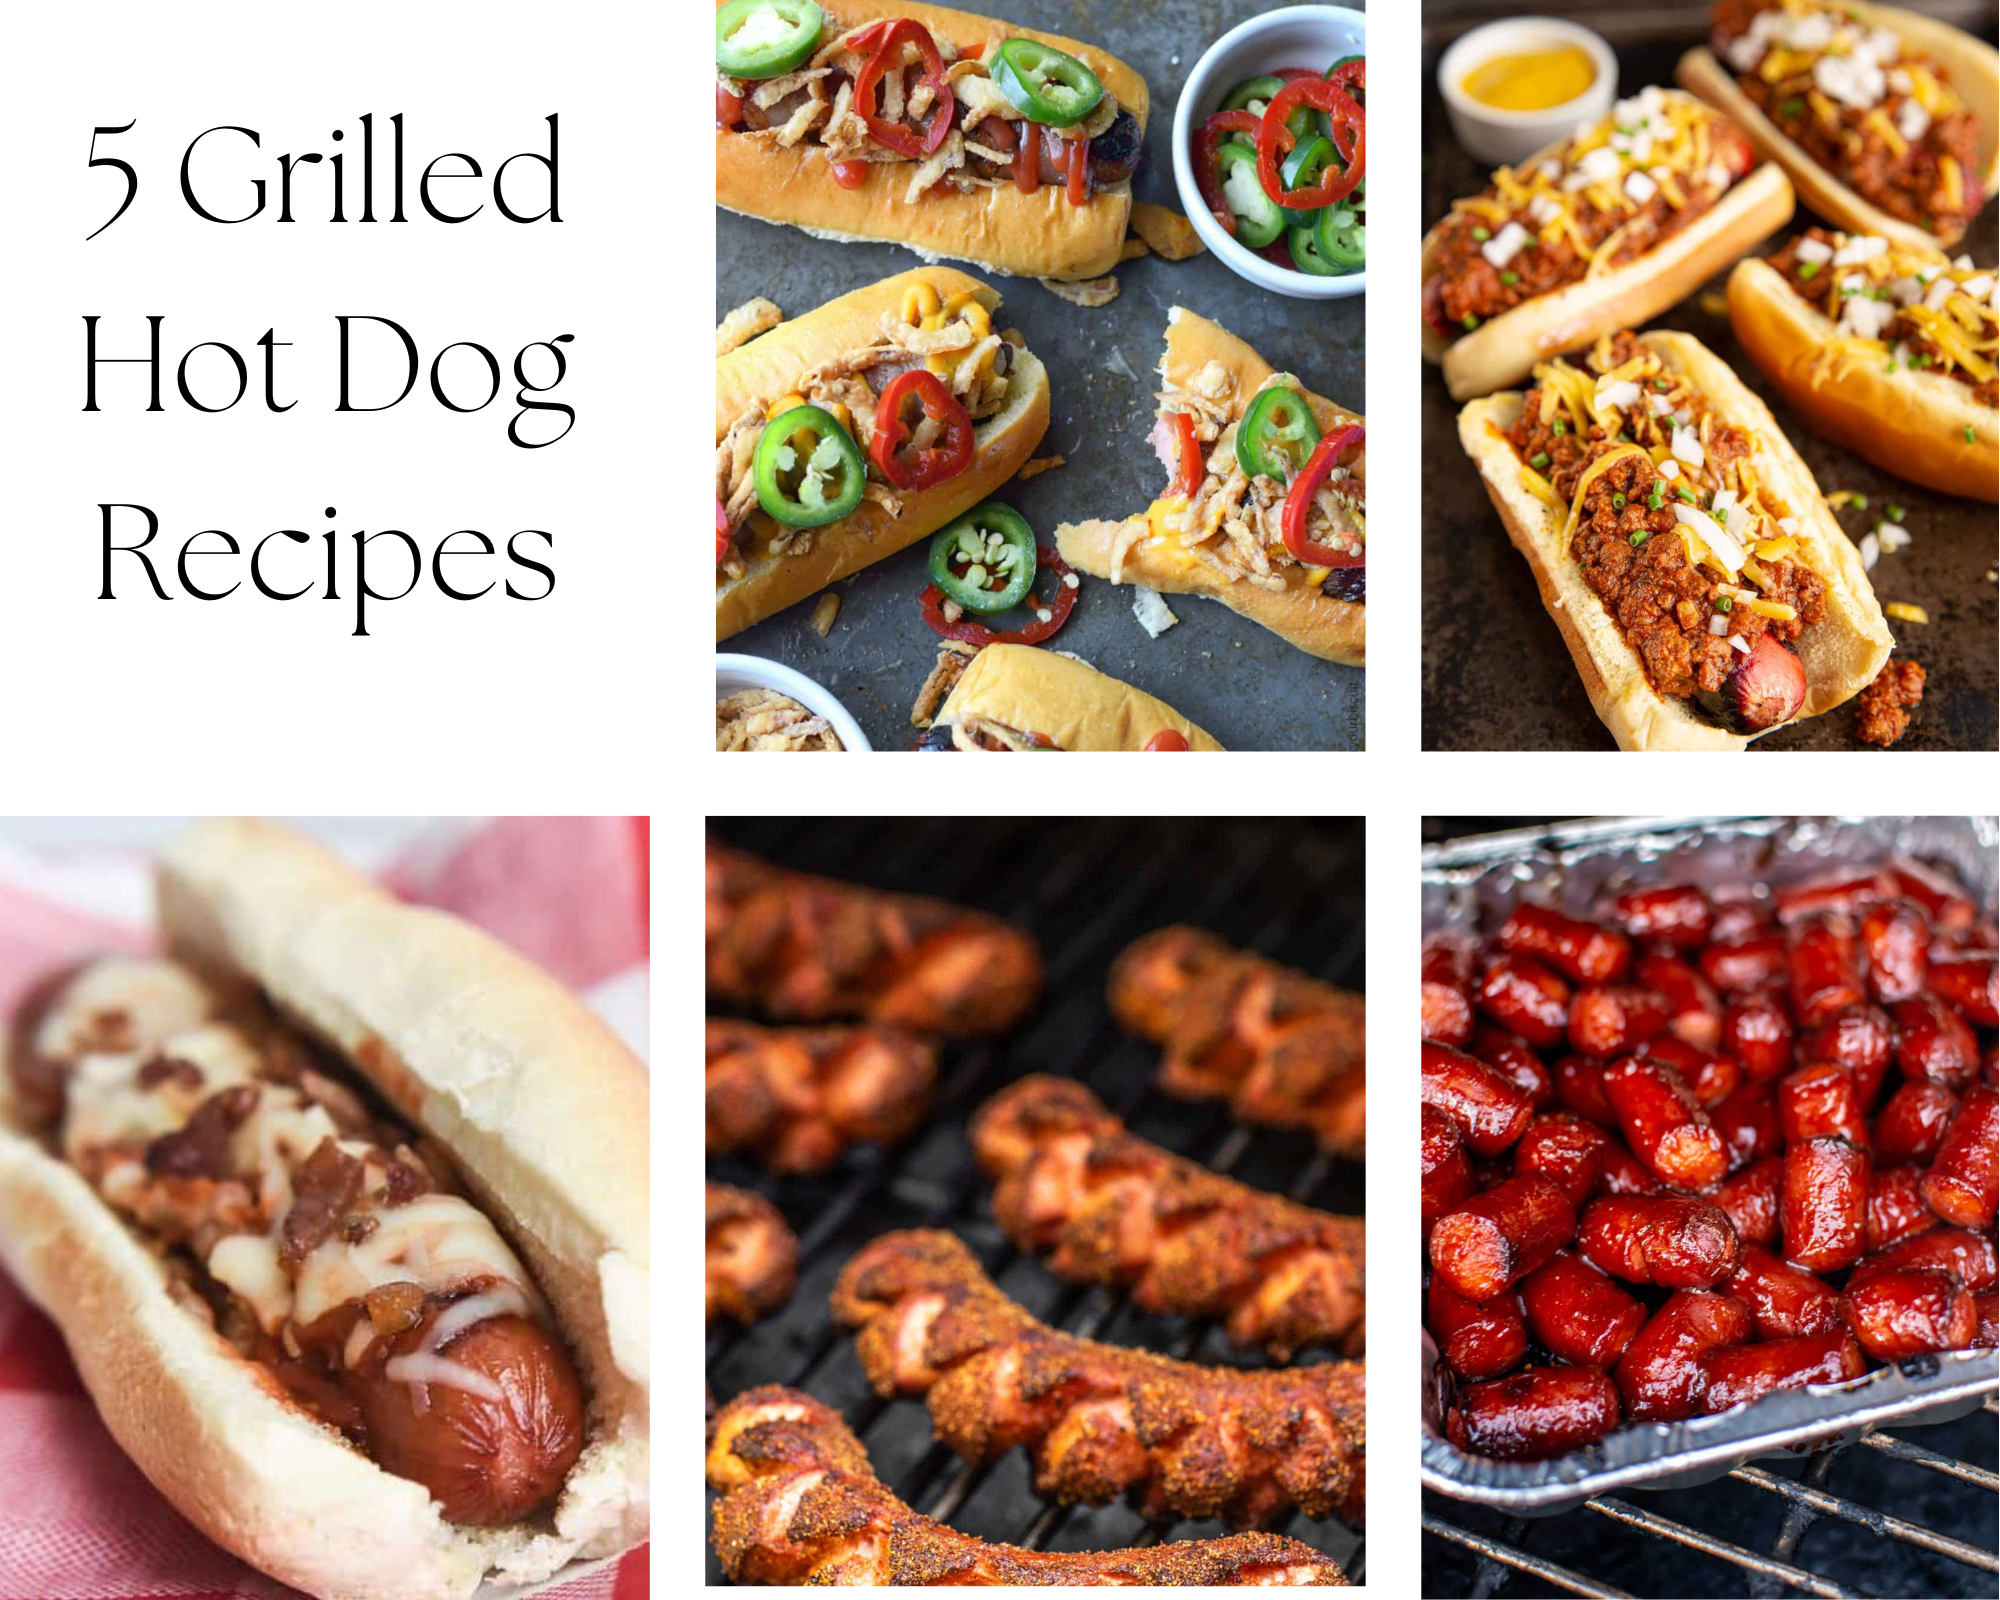 5 Grilled Hot Dogs Recipes